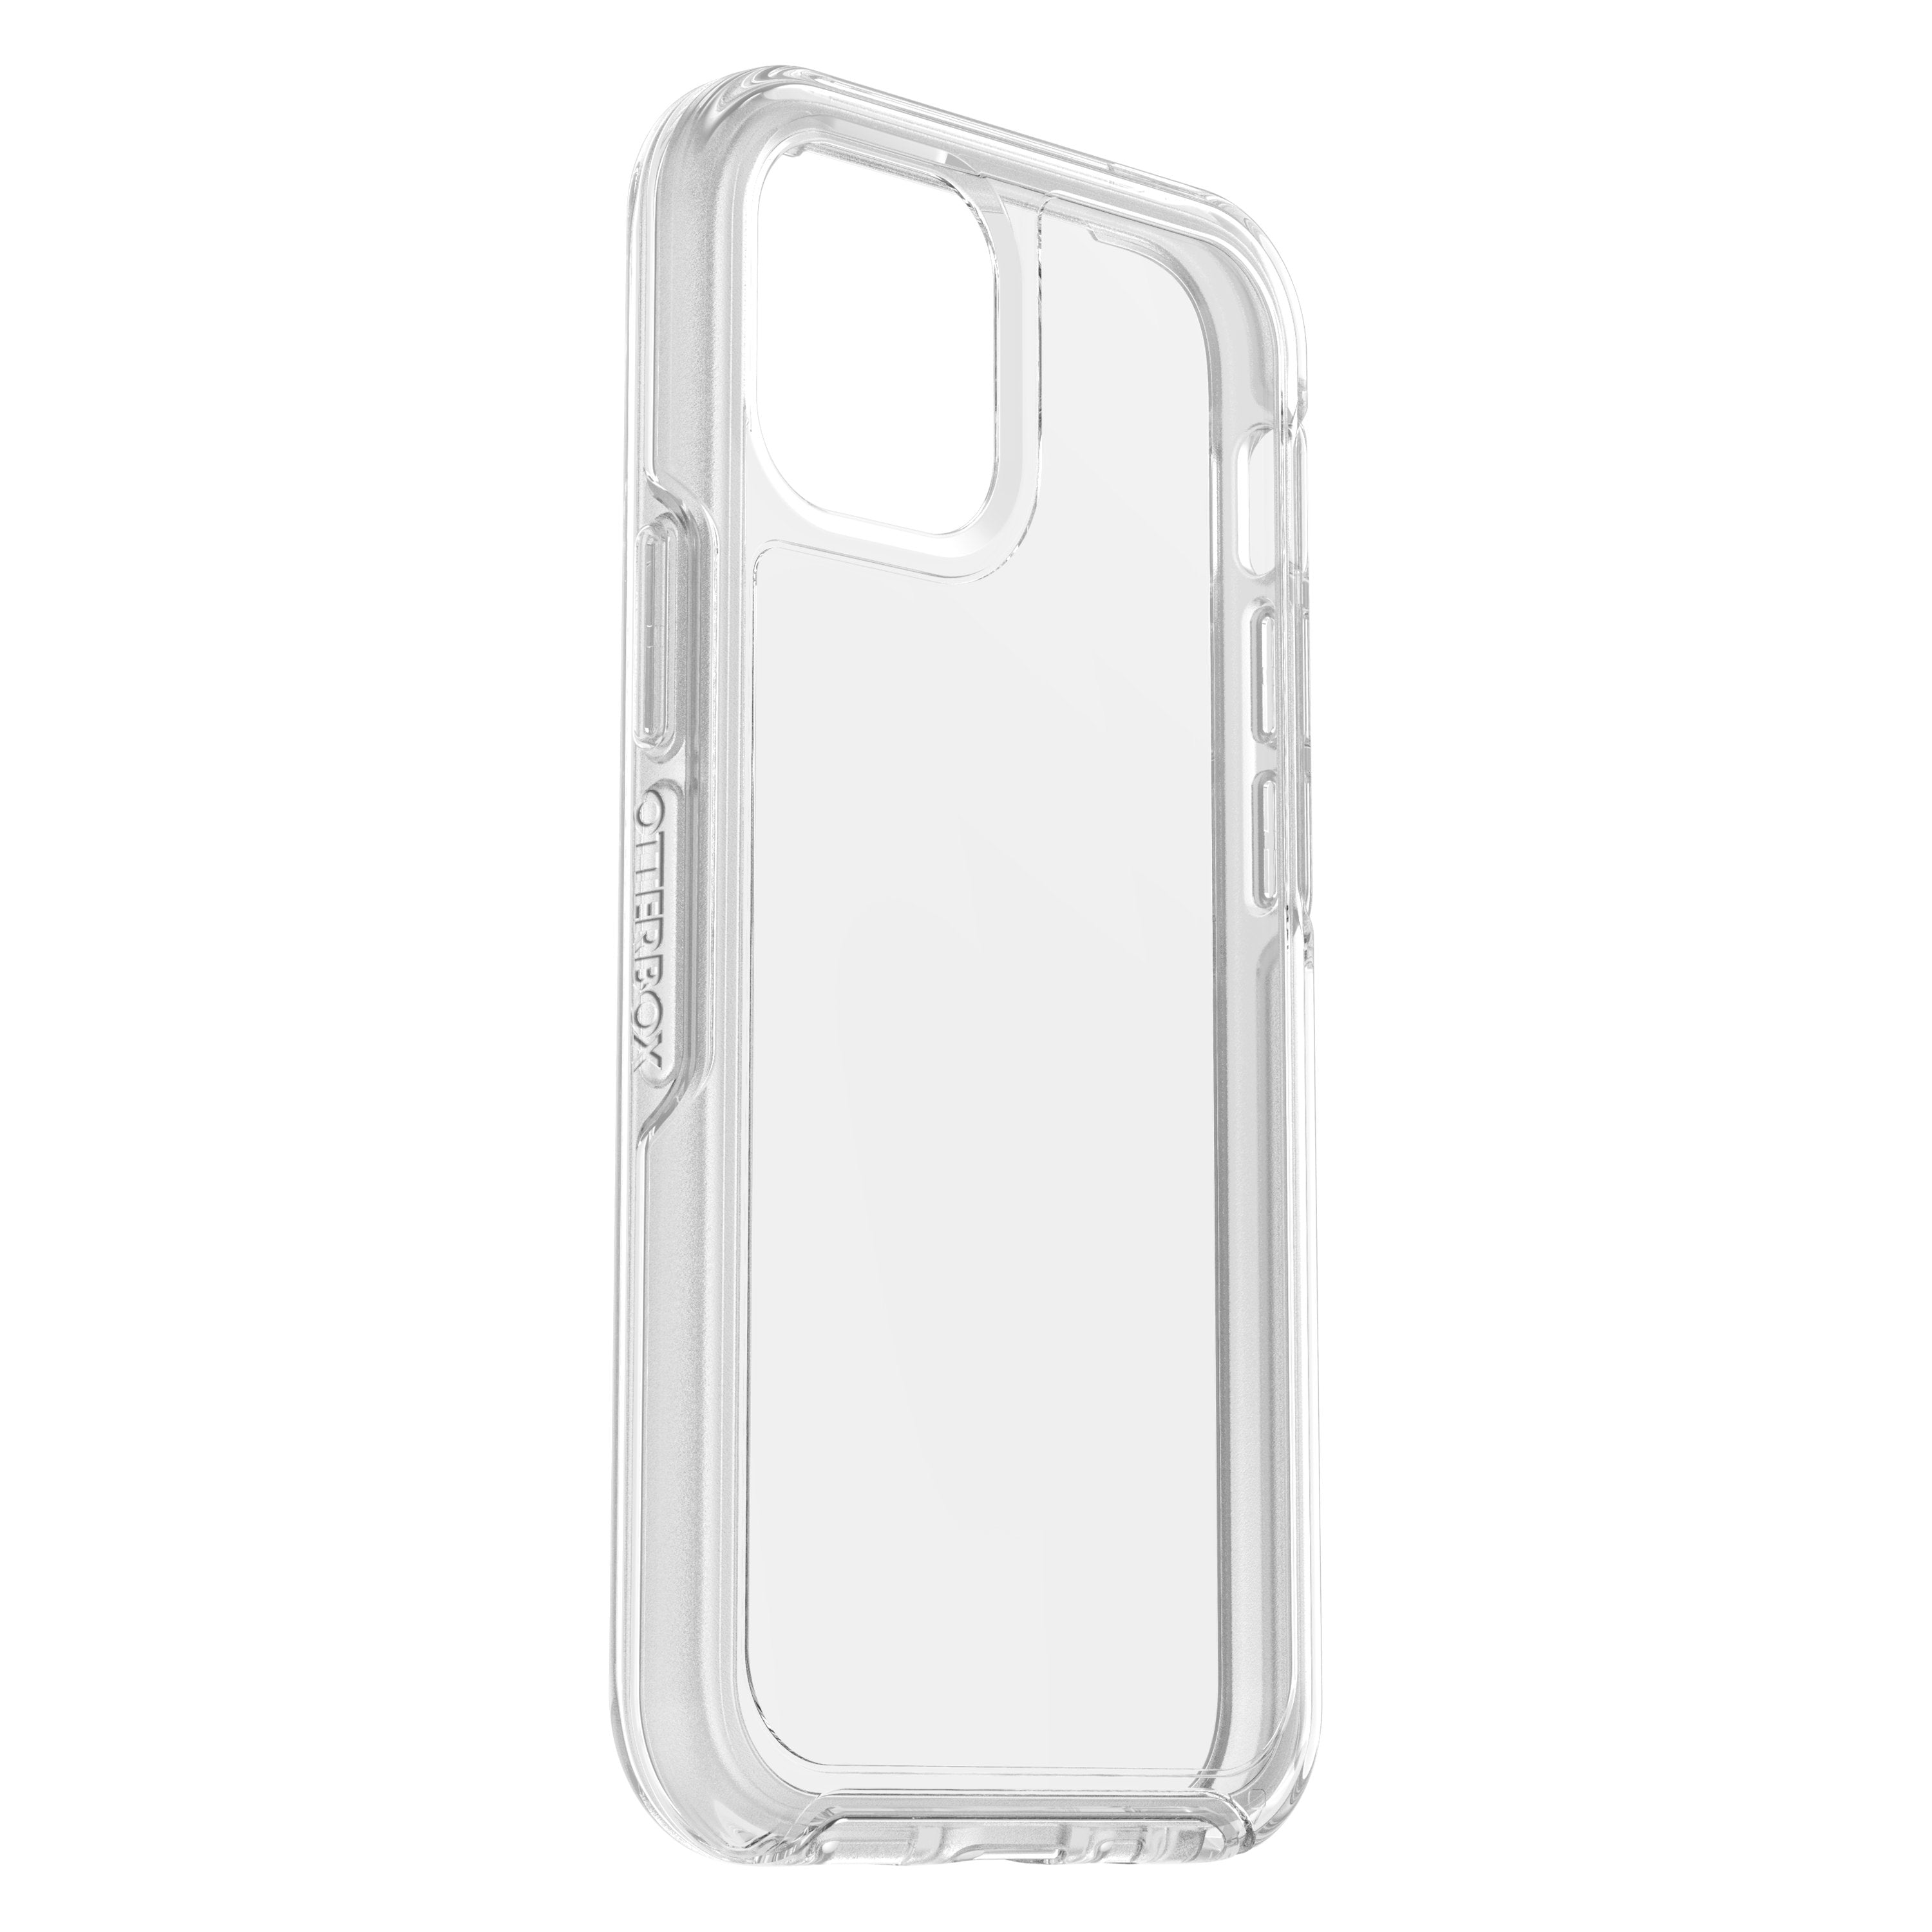 OtterBox Apple iPhone 12 Mini SYMMETRY Clear case - Slim and Lightweight Cover w/ Military Grade Drop Protection, Wireless Charging Compatible - Clear